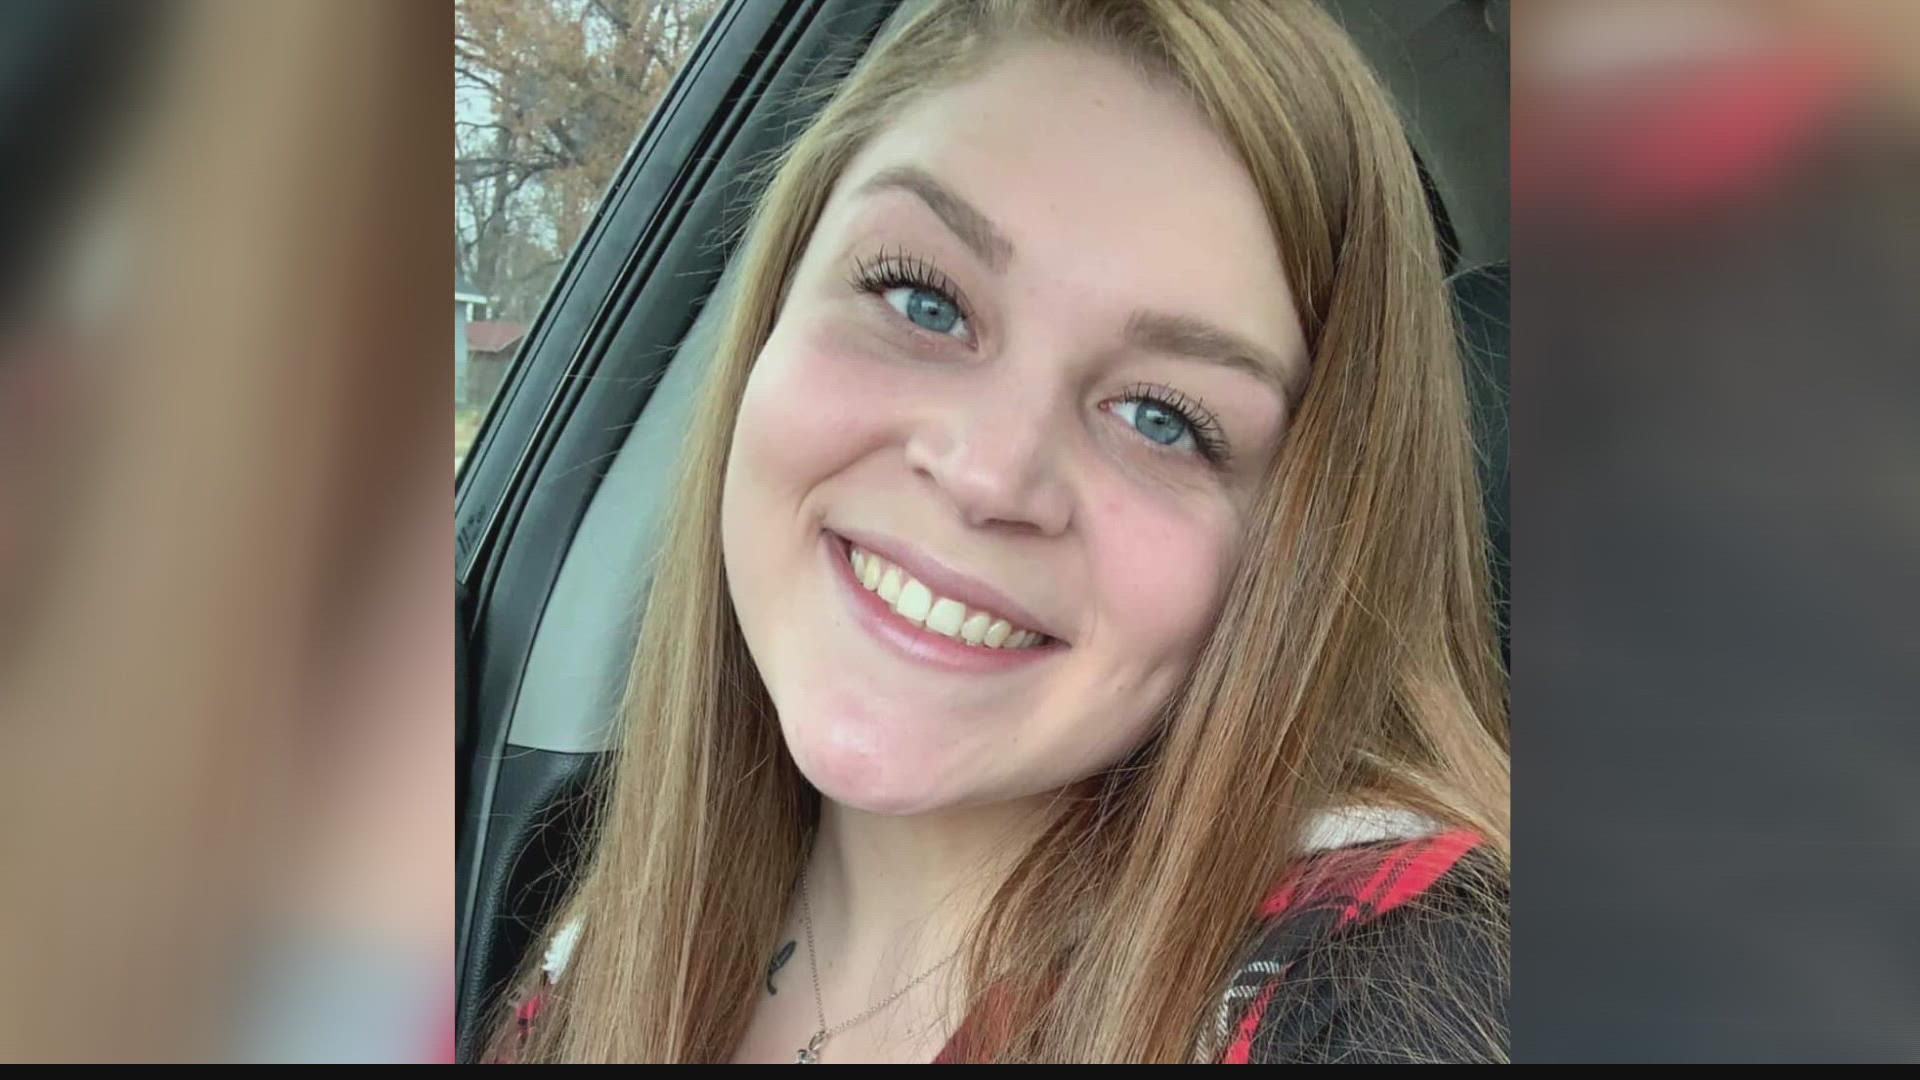 A man is facing murder charges after police said he decapitated his pregnant ex-girlfriend in Alton, Illinois. Liese A. Dodd, 22, was found dead on Thursday.